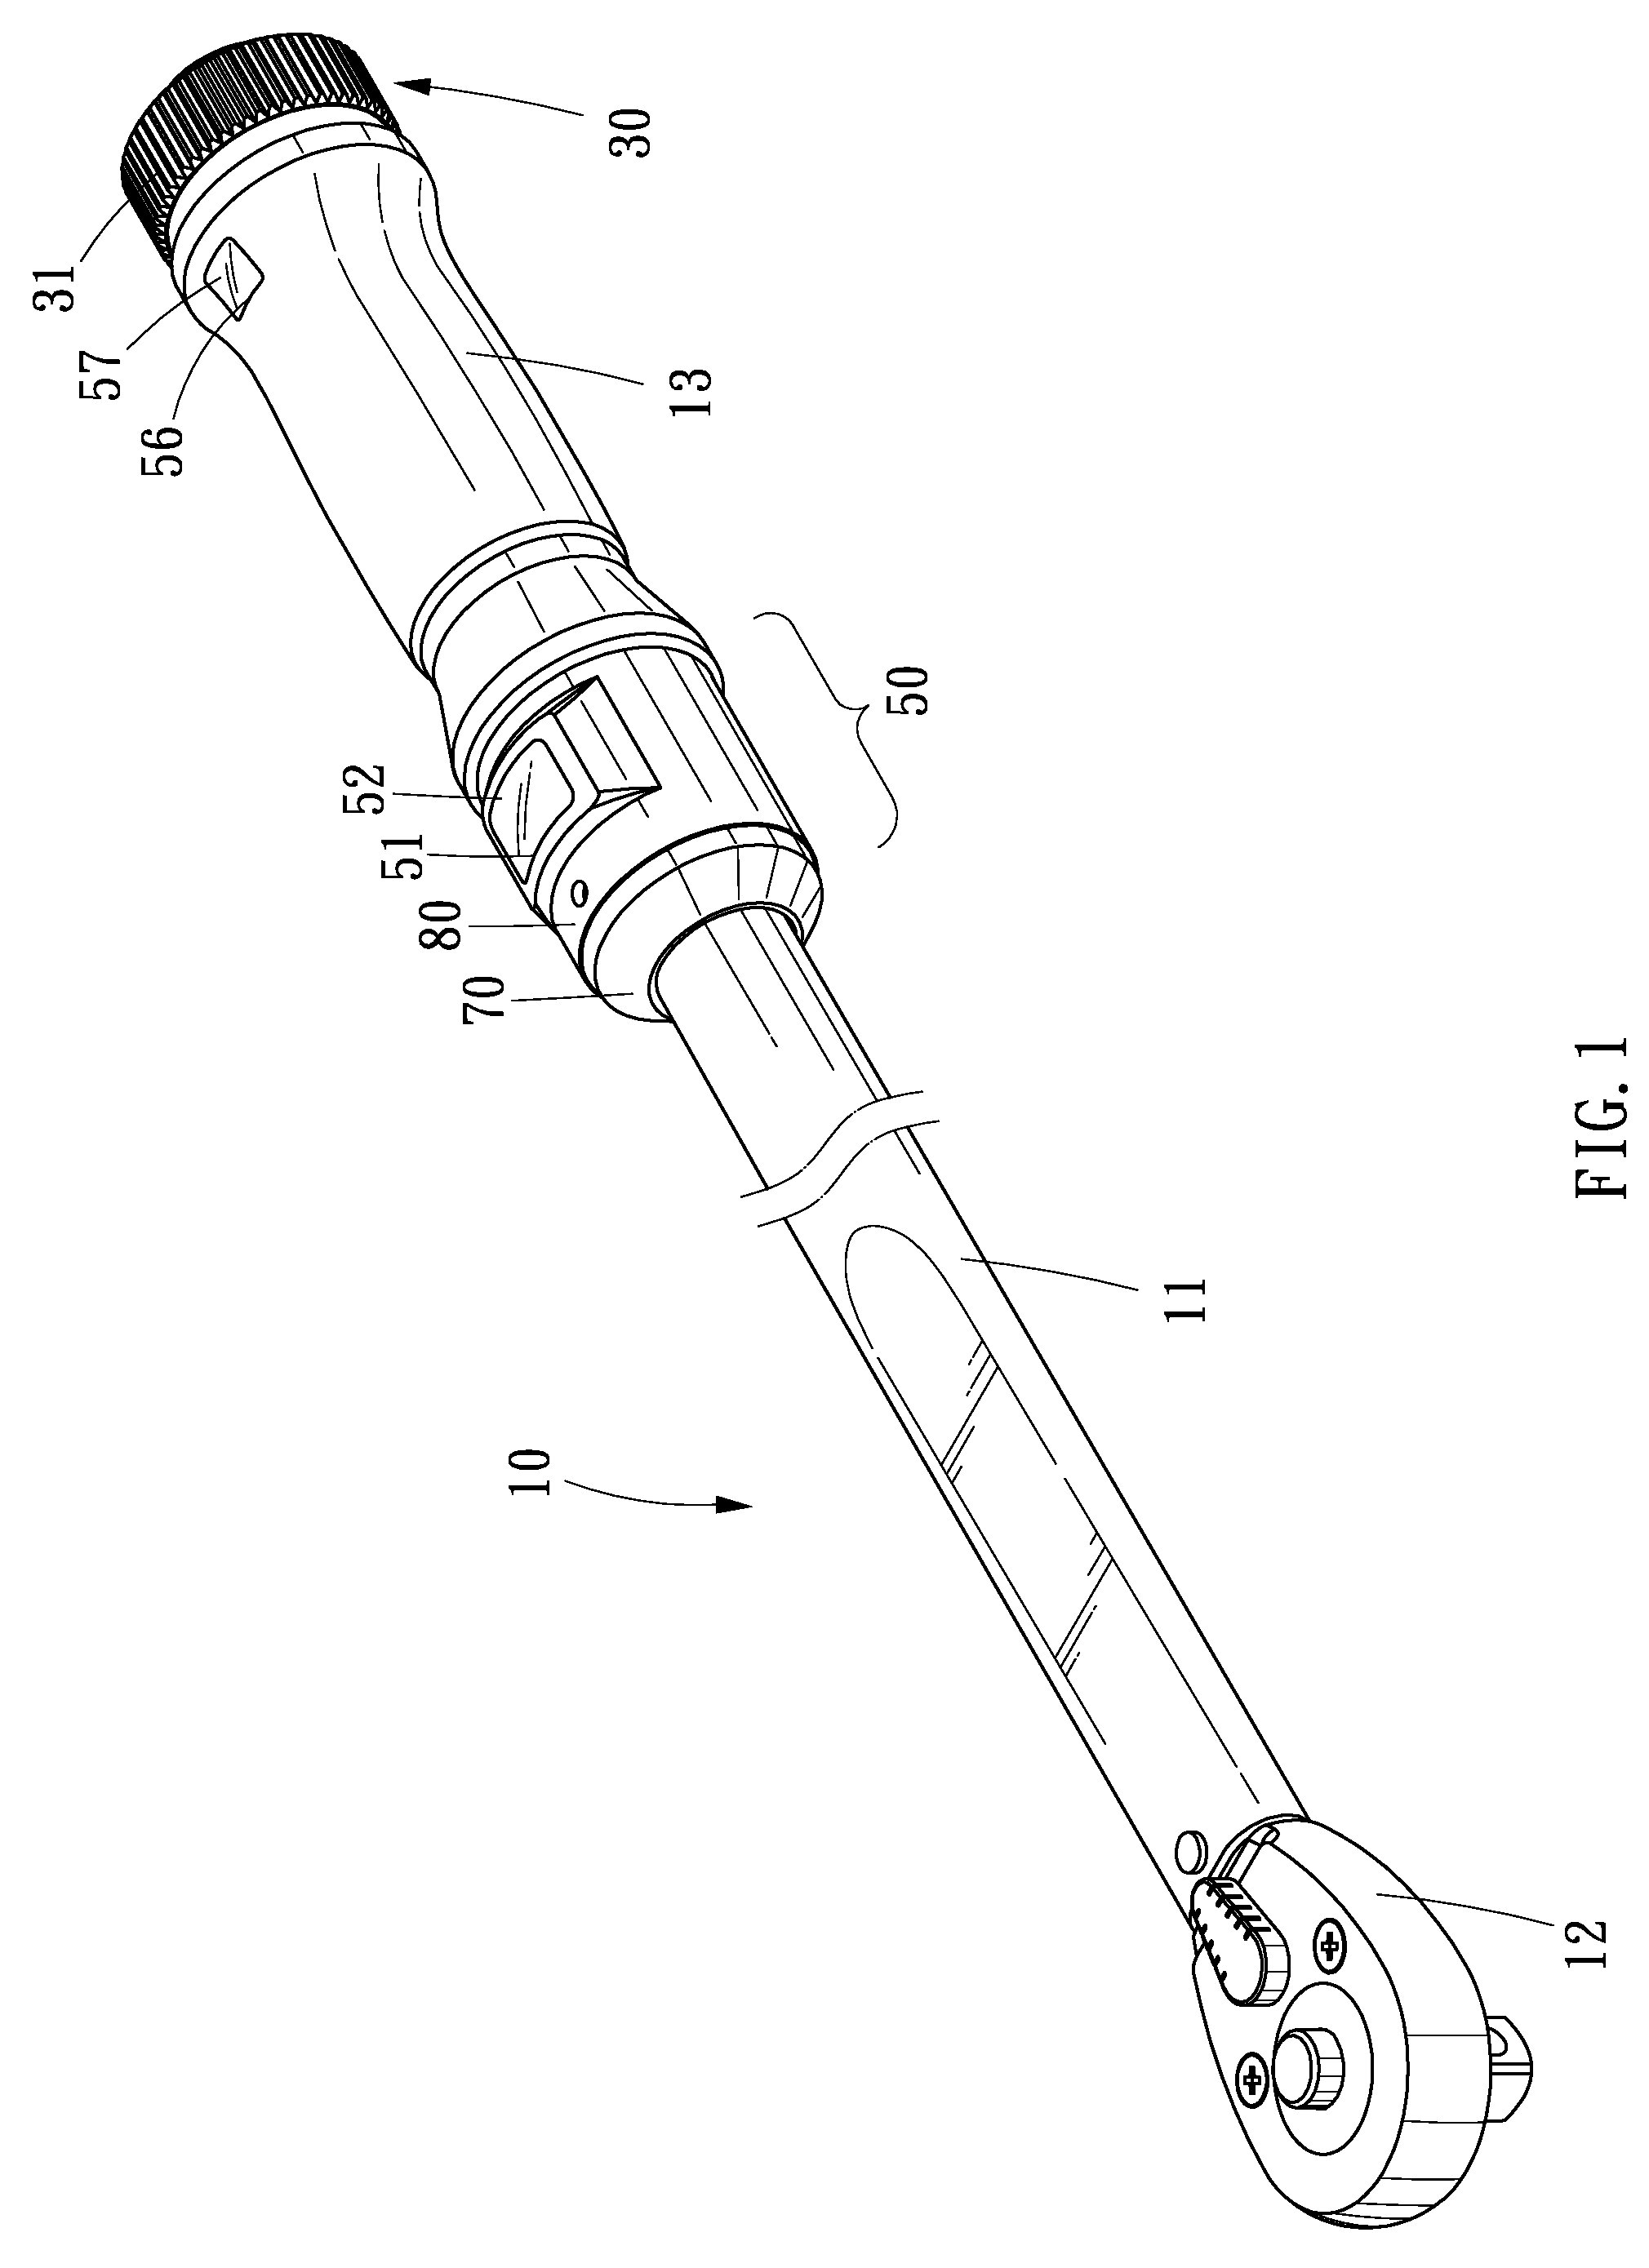 Wrench equipped with a precise torque-measuring device